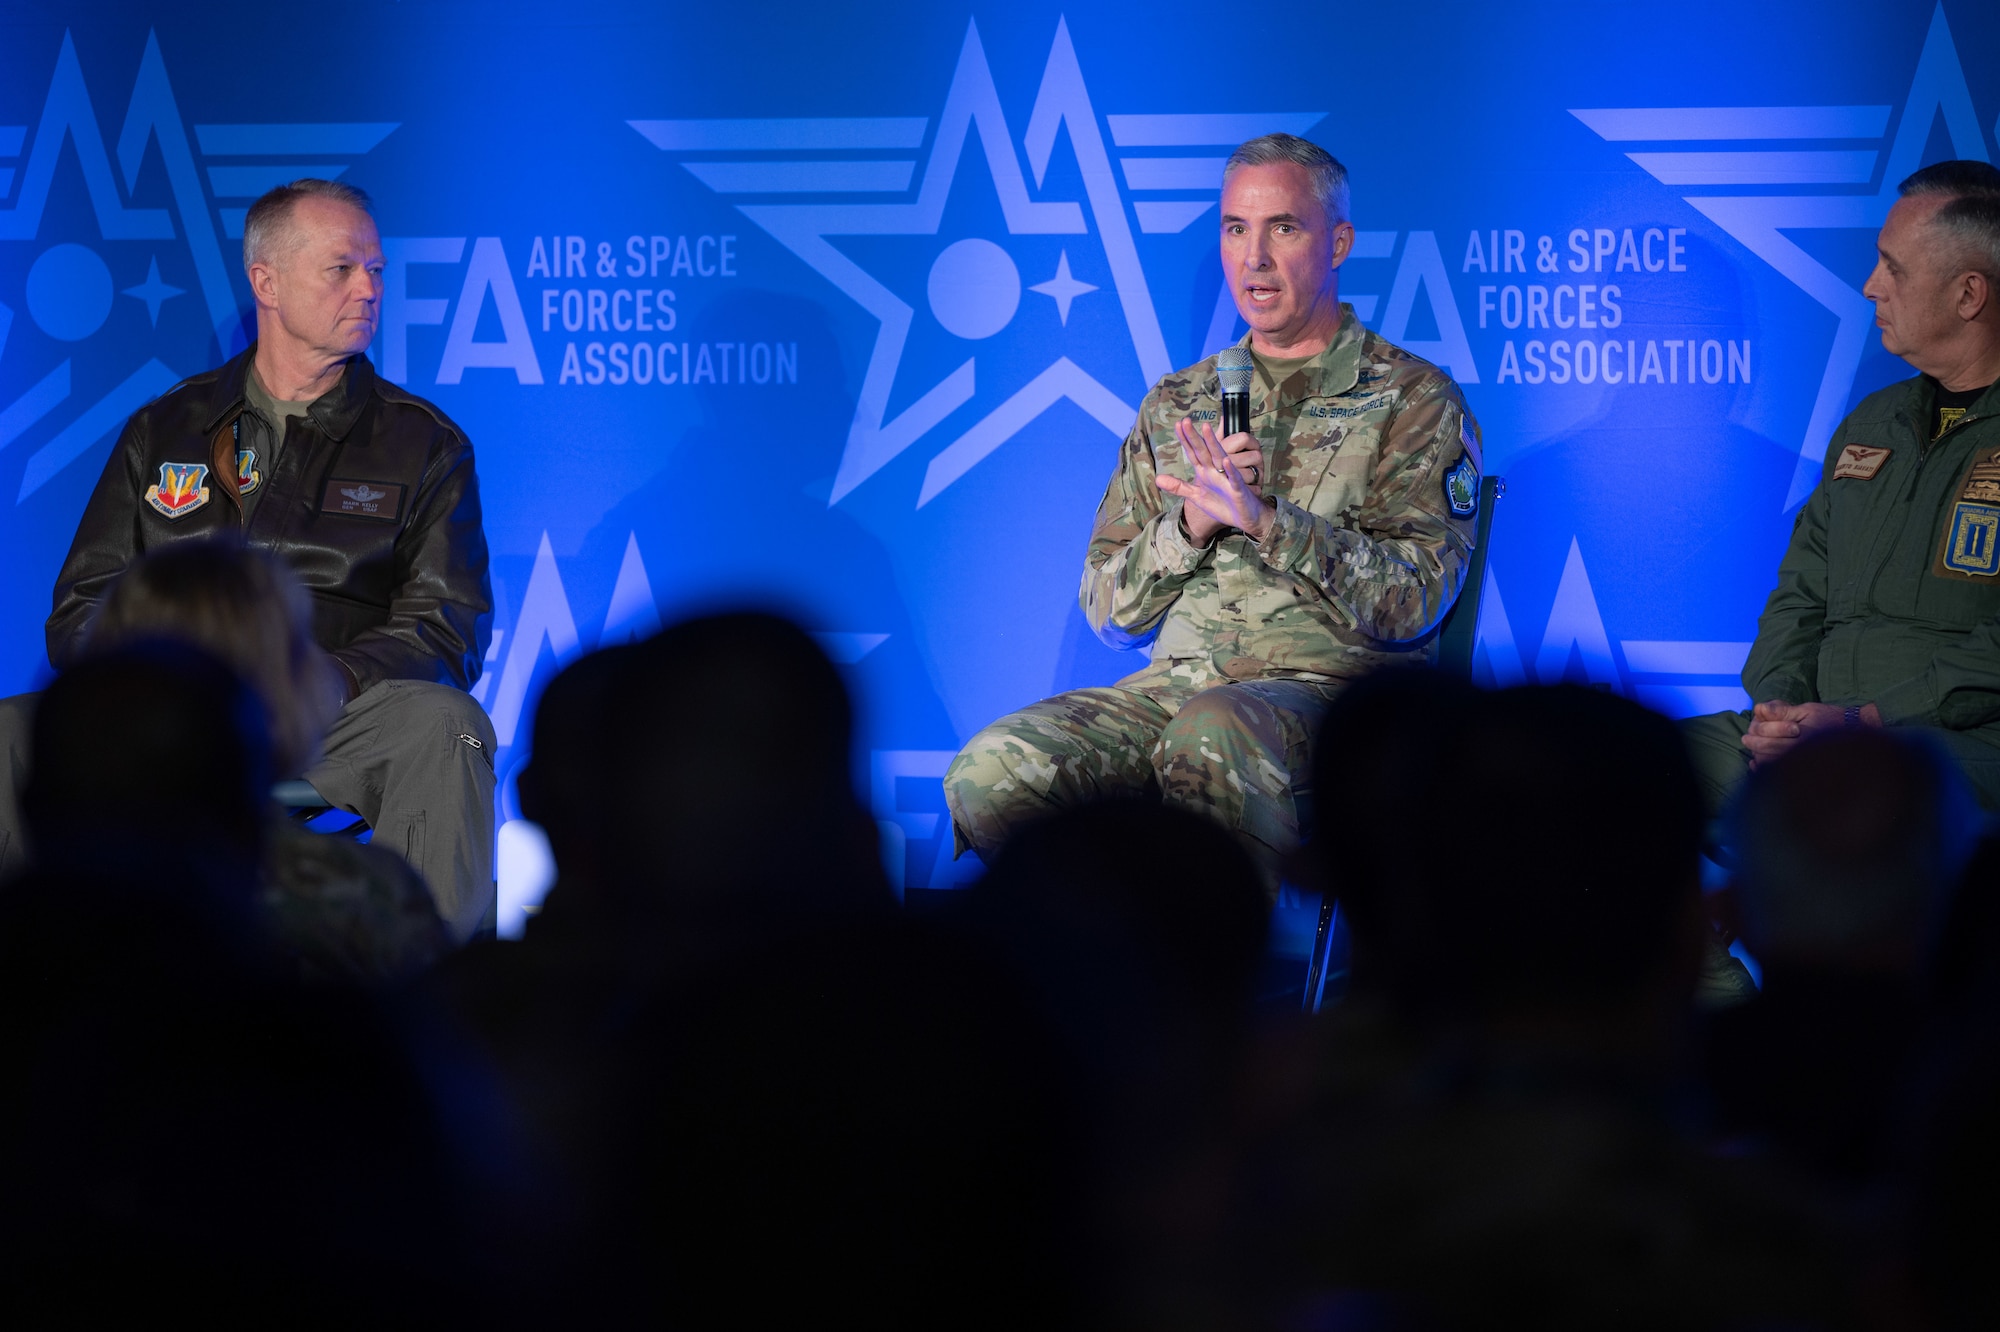 U.S. Space Force Lt. Gen. Stephen Whiting, Commander of Space Operations Command, participates in a panel discussion at the 2023 Air and Space Forces Association Warfare Symposium in Aurora, Colorado, March 7, 2023. Whiting shared the stage with Gen. Mark Kelly, Commander of Air Combat Command, and Italian Lt. Gen. Alberto Biavati, Italian Air Force Operational Forces Commander, for a panel titled "Every Threat a Target." (U.S. Space Force photo by Dave Grim)